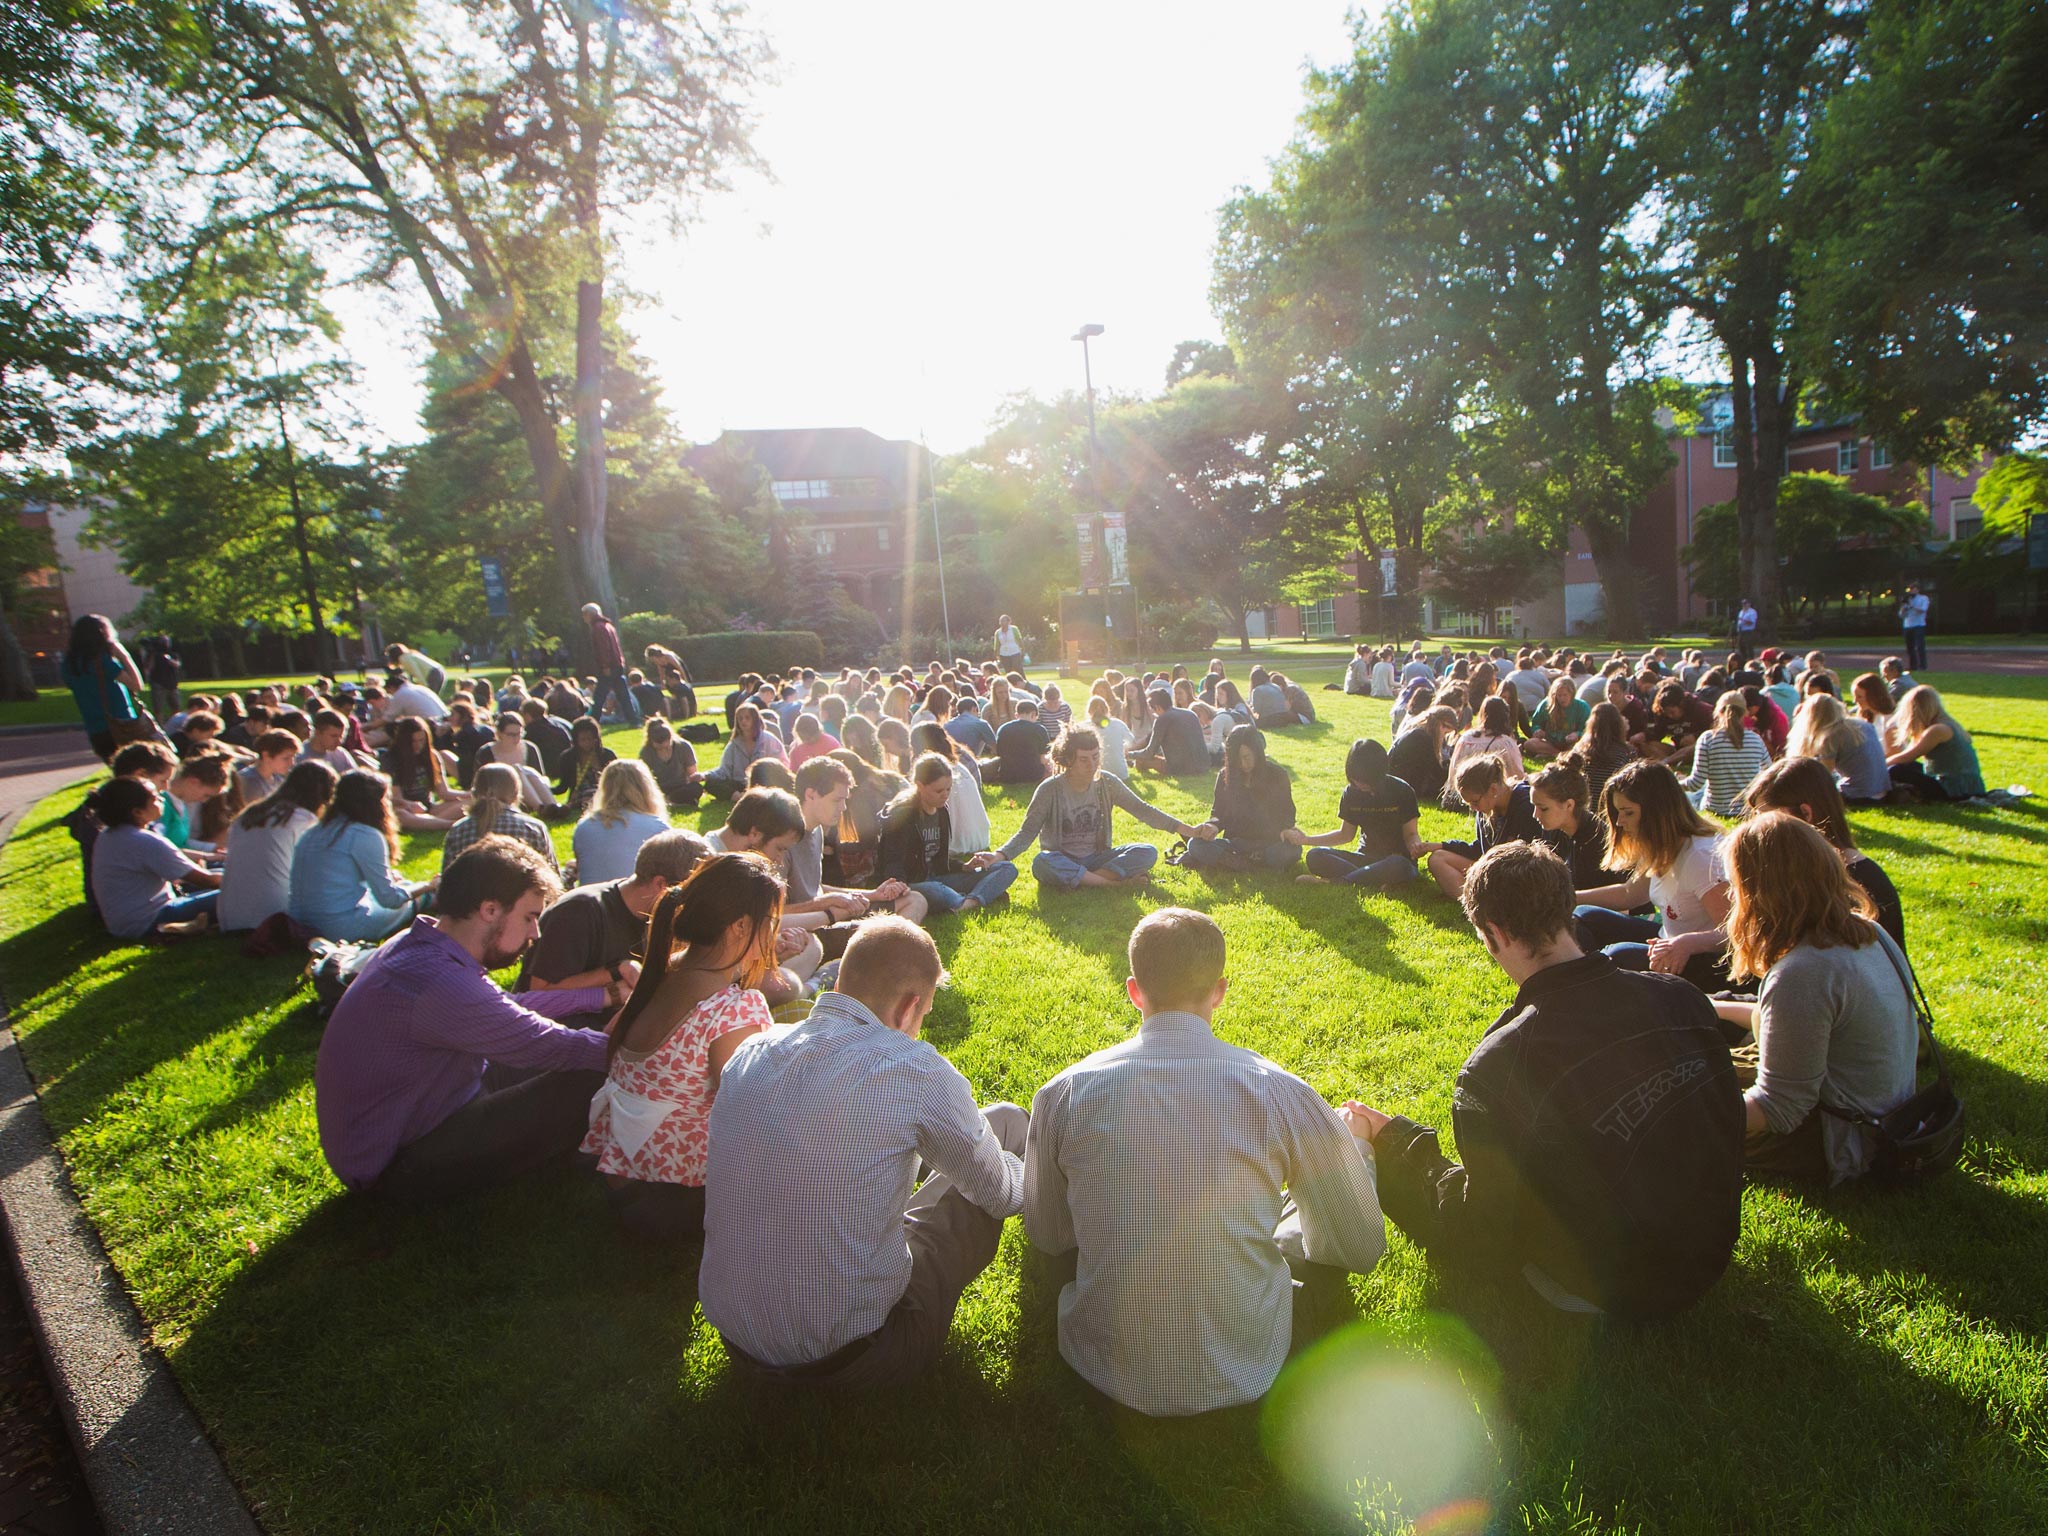 Students link hands and pray on the campus lawns of Seattle Pacific University,
where Thursday’s fatal shooting took place